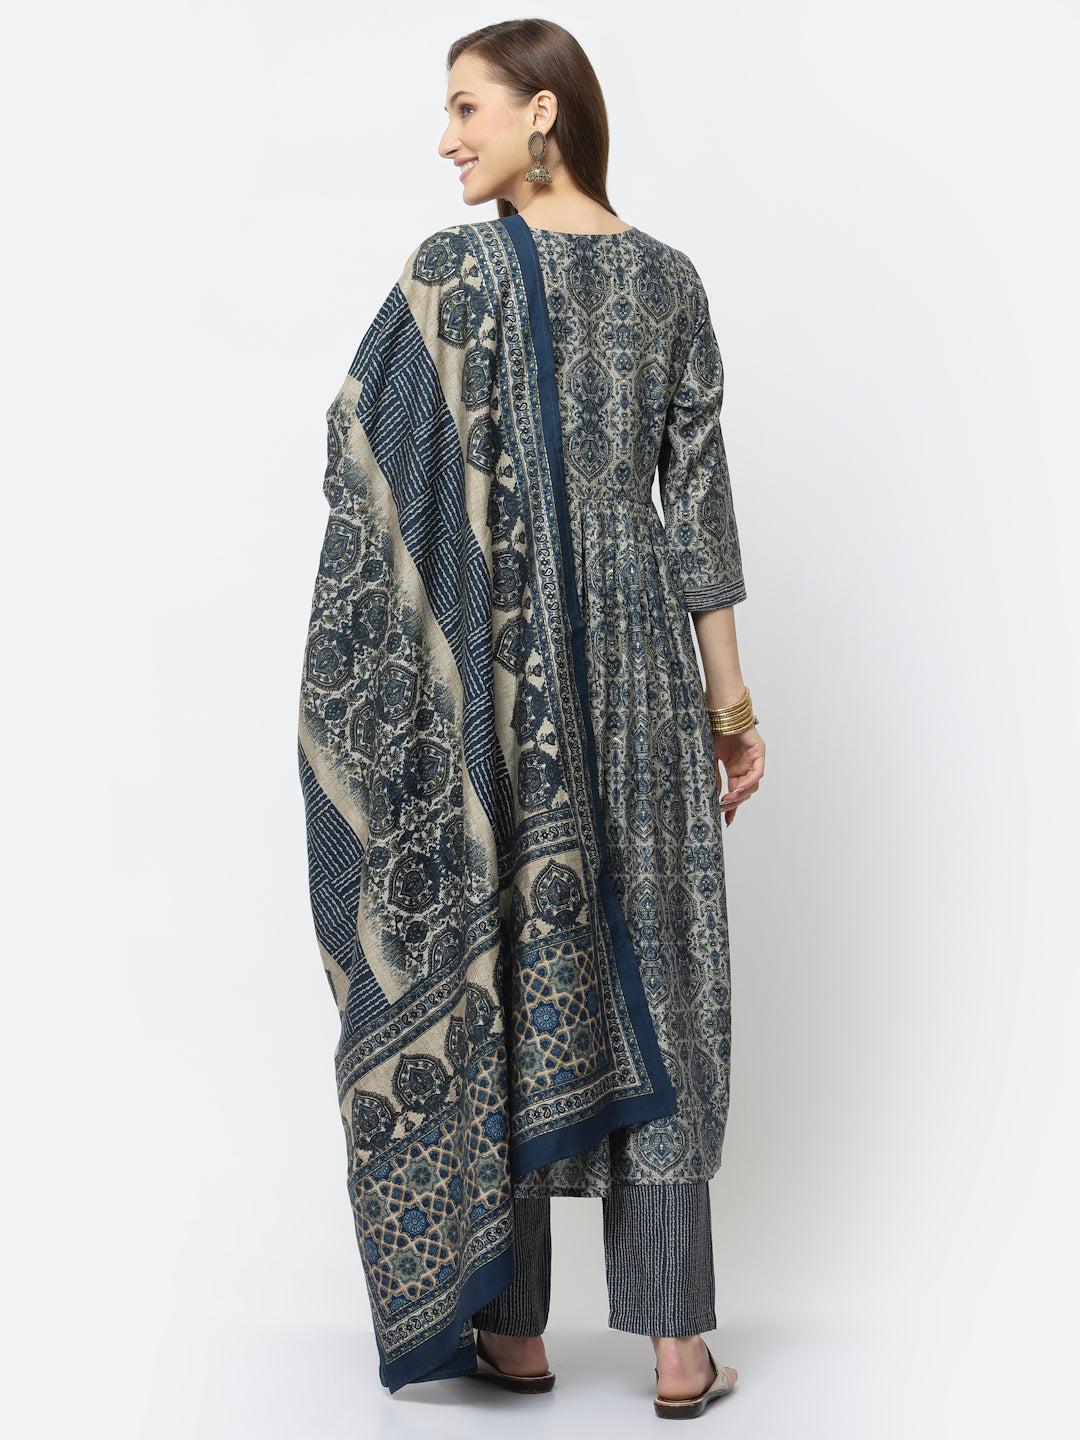 Floral Foil Printed and Paisley Embroidered Flared Kurta Set with Pant and Dupatta - ARH1462B